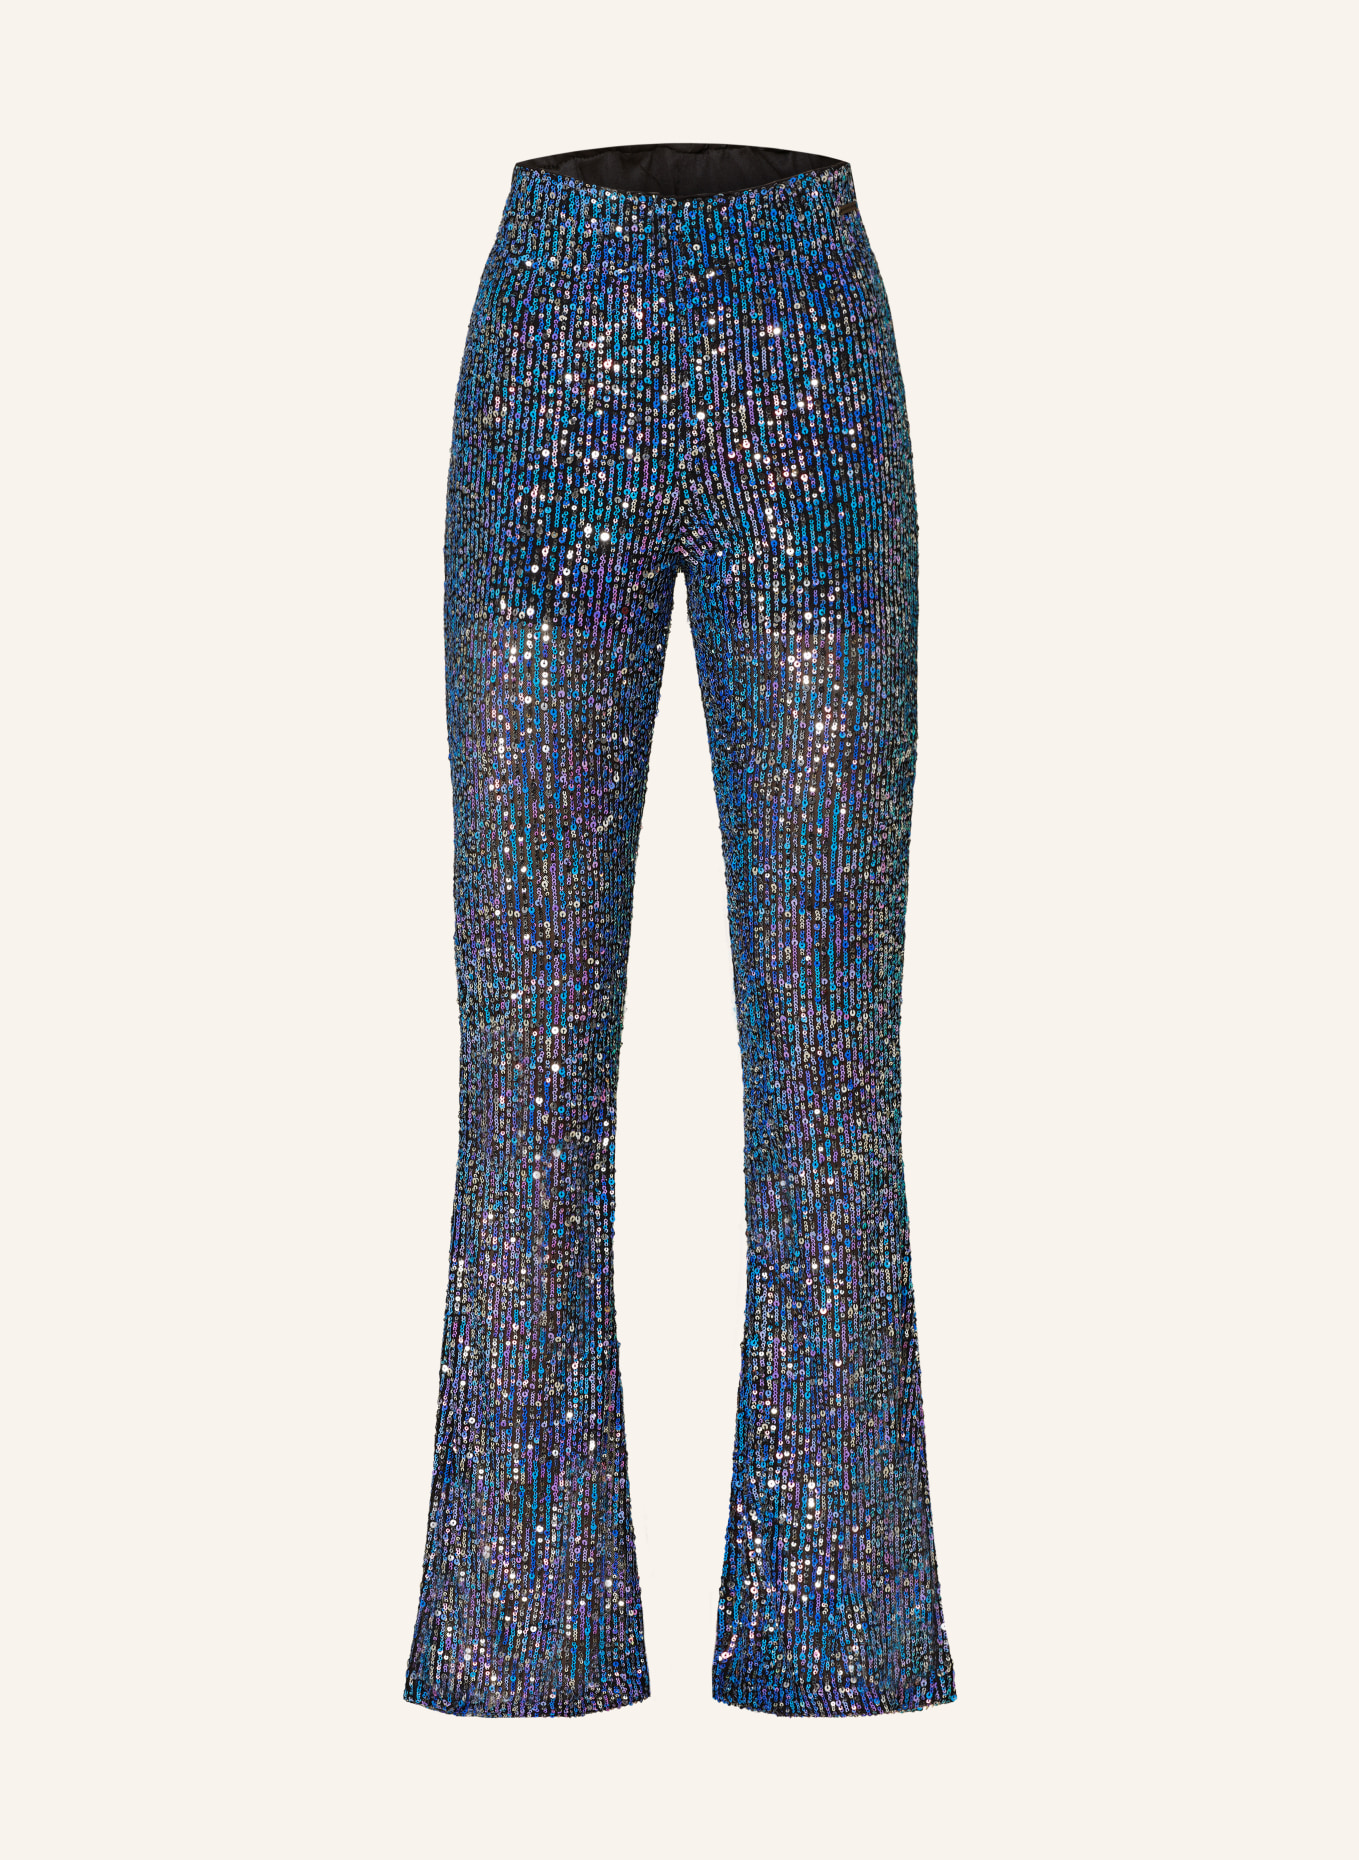 COLOURFUL REBEL Mesh trousers STEFFIE with sequins, Color: BLUE/ LIGHT PURPLE/ SILVER (Image 1)